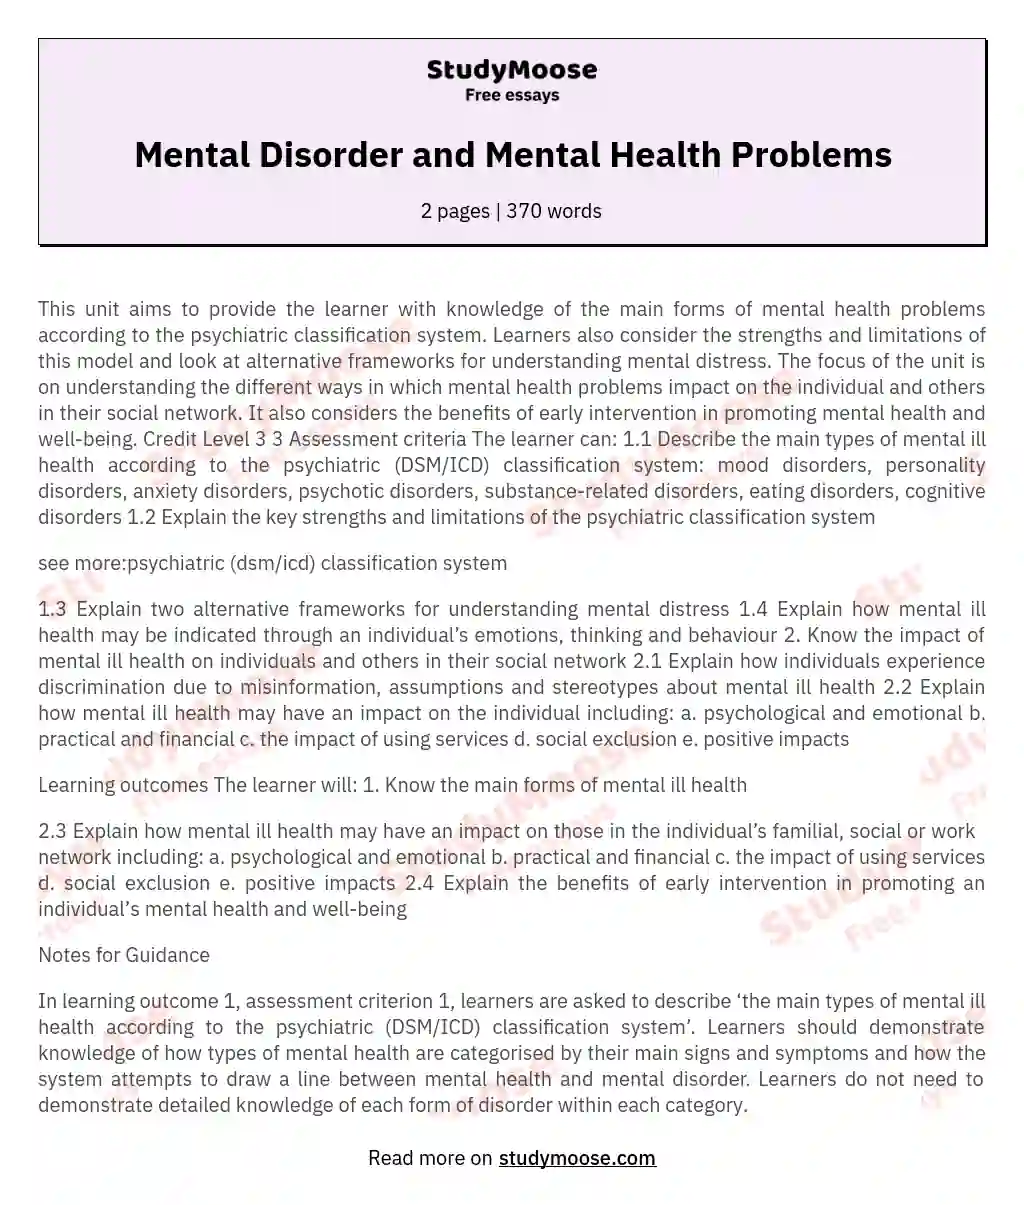 Mental Disorder and Mental Health Problems